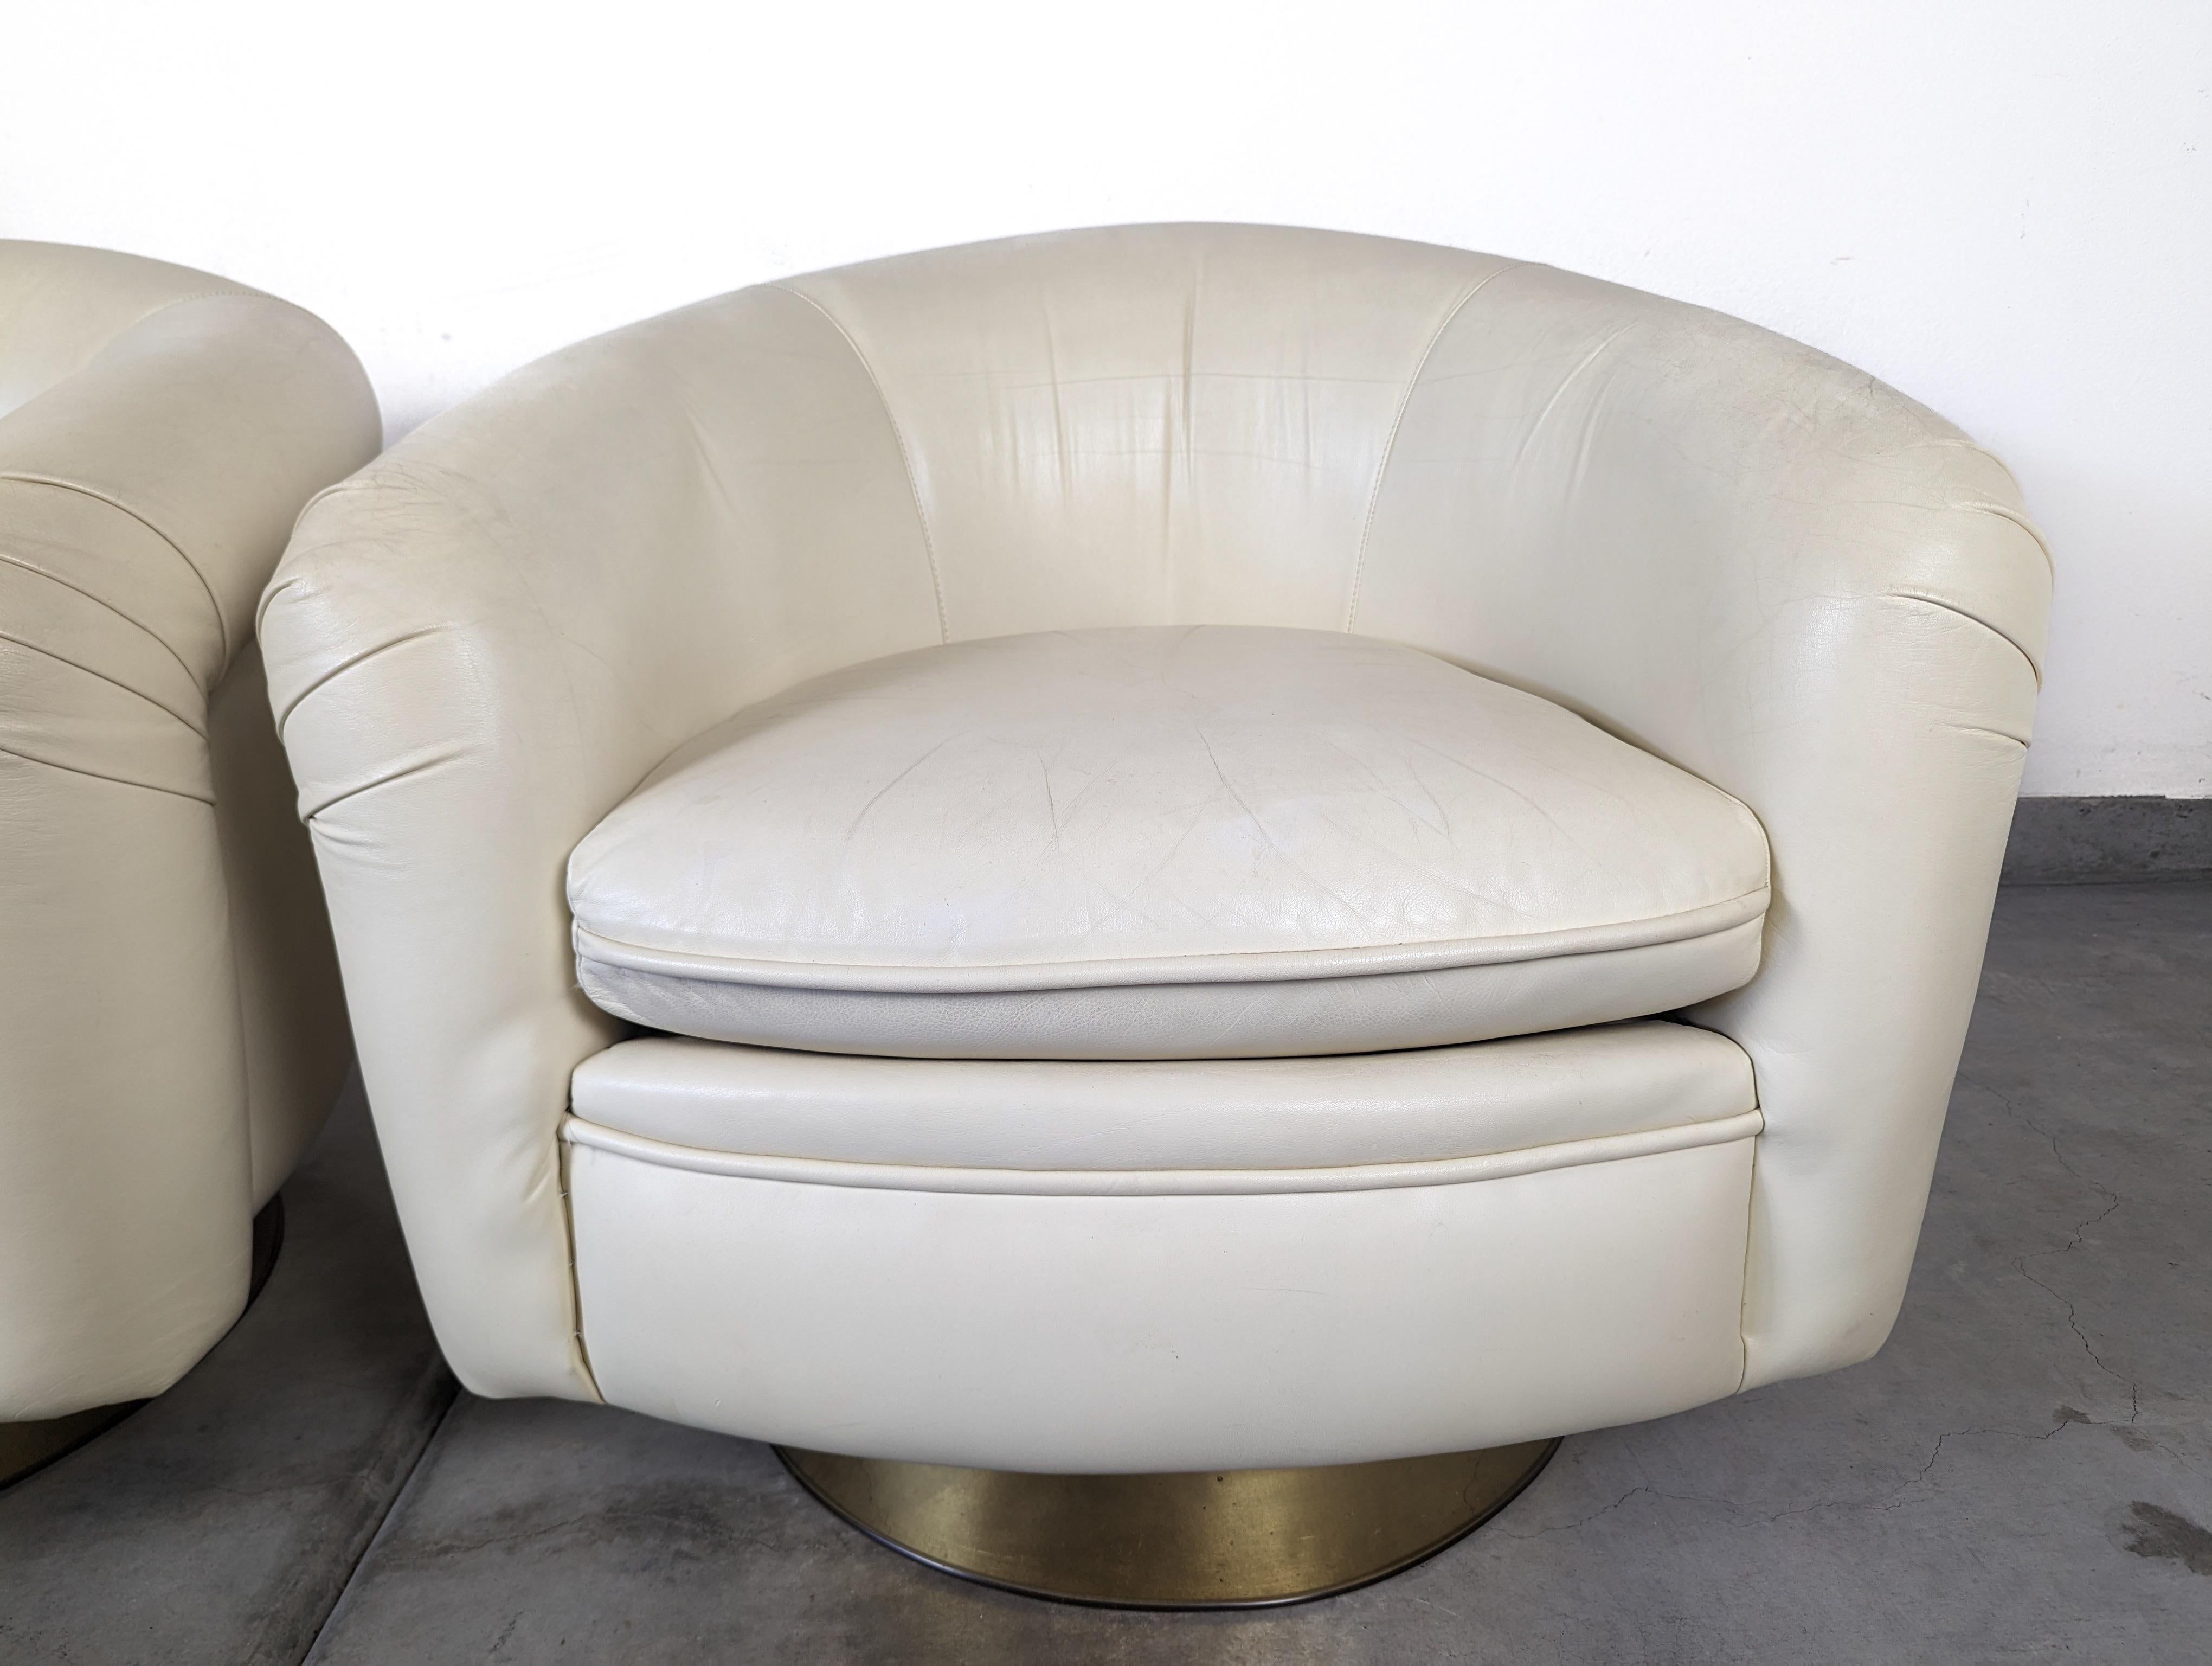 Leather Tilt Swivel Lounge Chairs by Milo Baughman for Thayer Coggin, c1970s For Sale 9